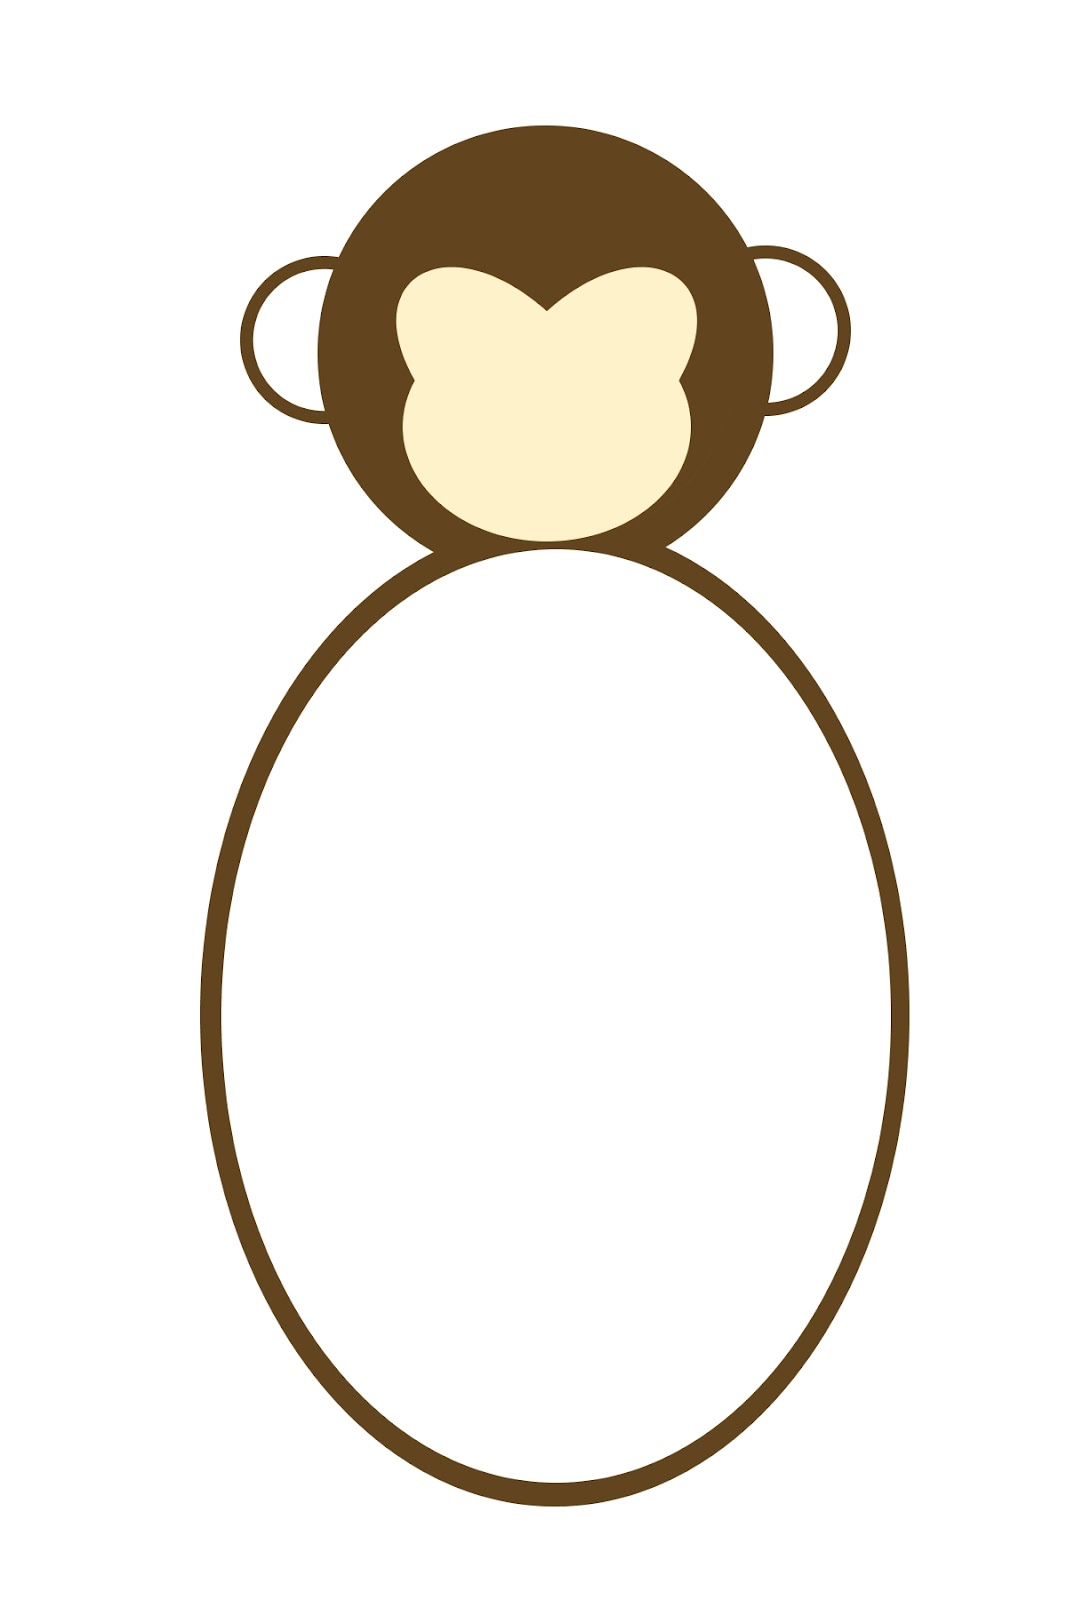 hanging-monkey-template-free-download-on-clipartmag